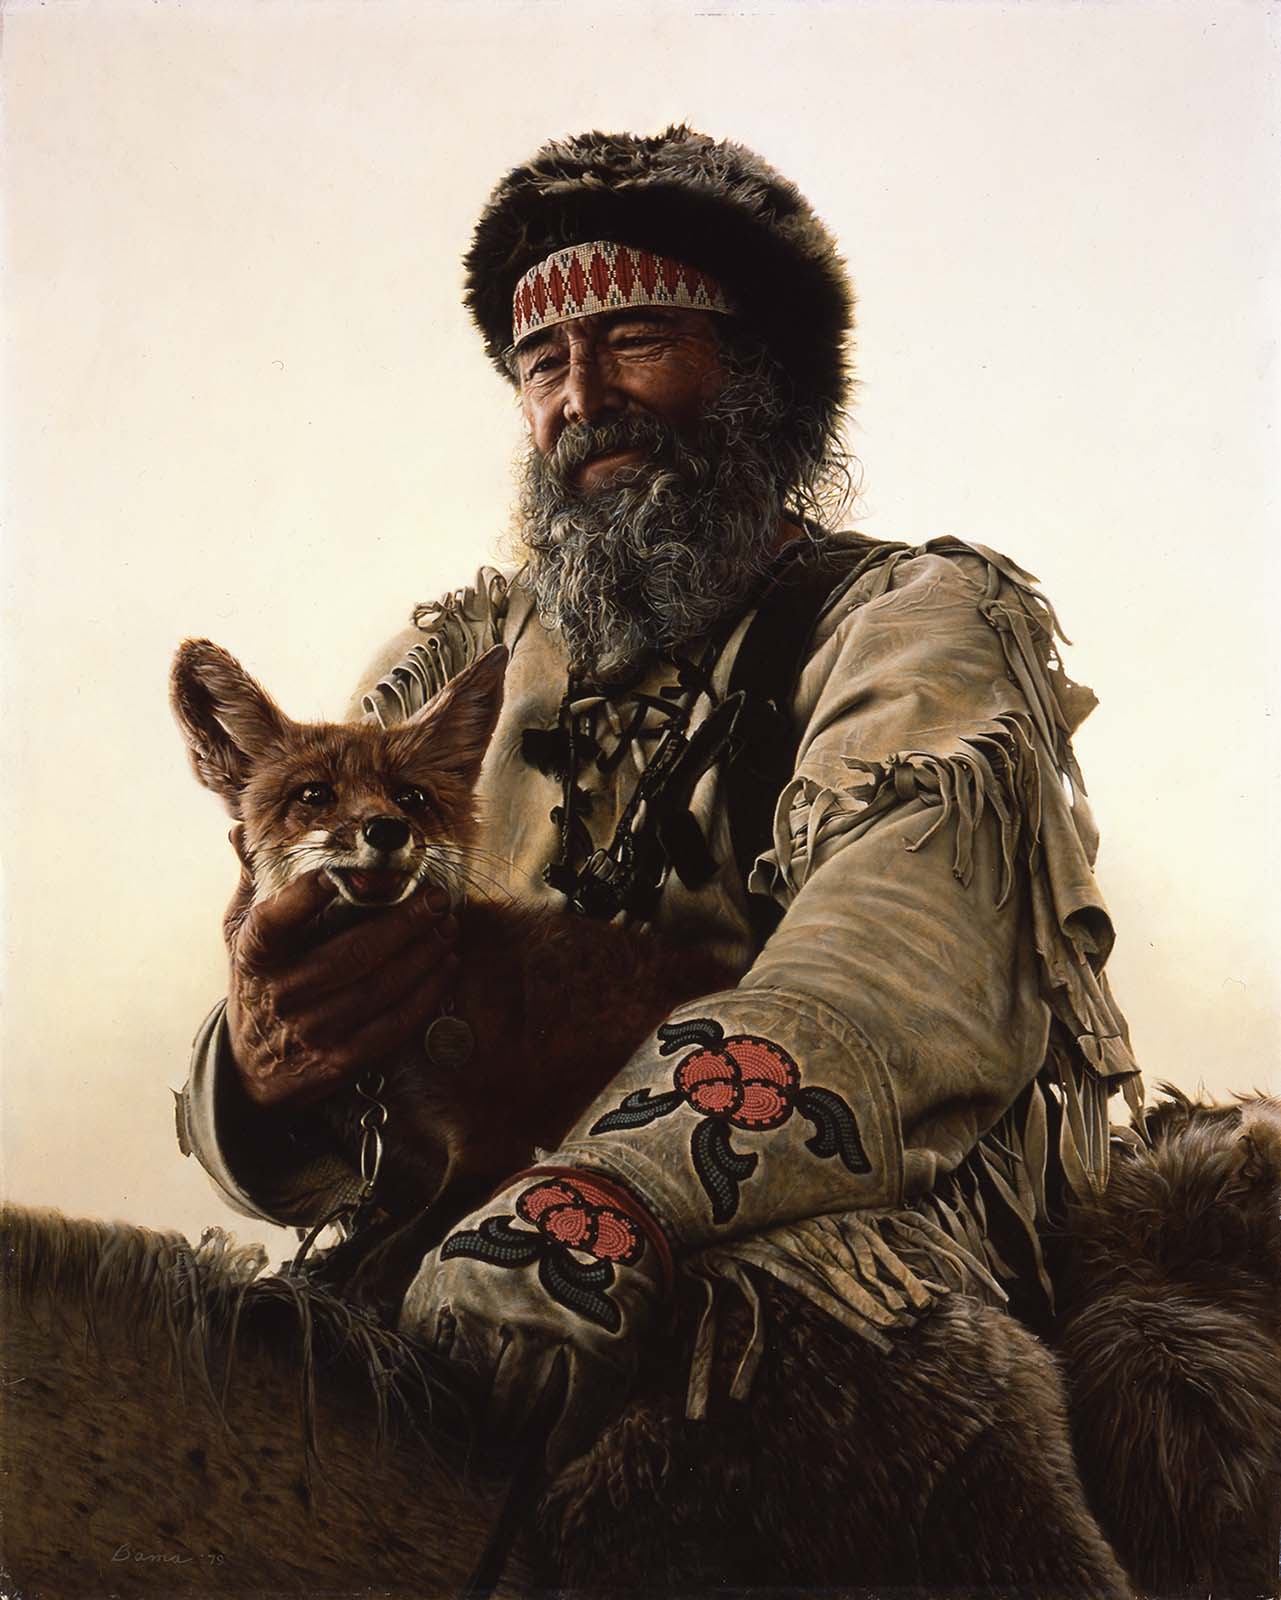 James Bama (1926-2022). "Timber Jack Joe and His Fox," 1979. Oil on artist's board, 30 x 23.875 inches. Gift in honor of Peg Coe, with respect and admiration, from Dick and Helen Cashman. 19.98.1